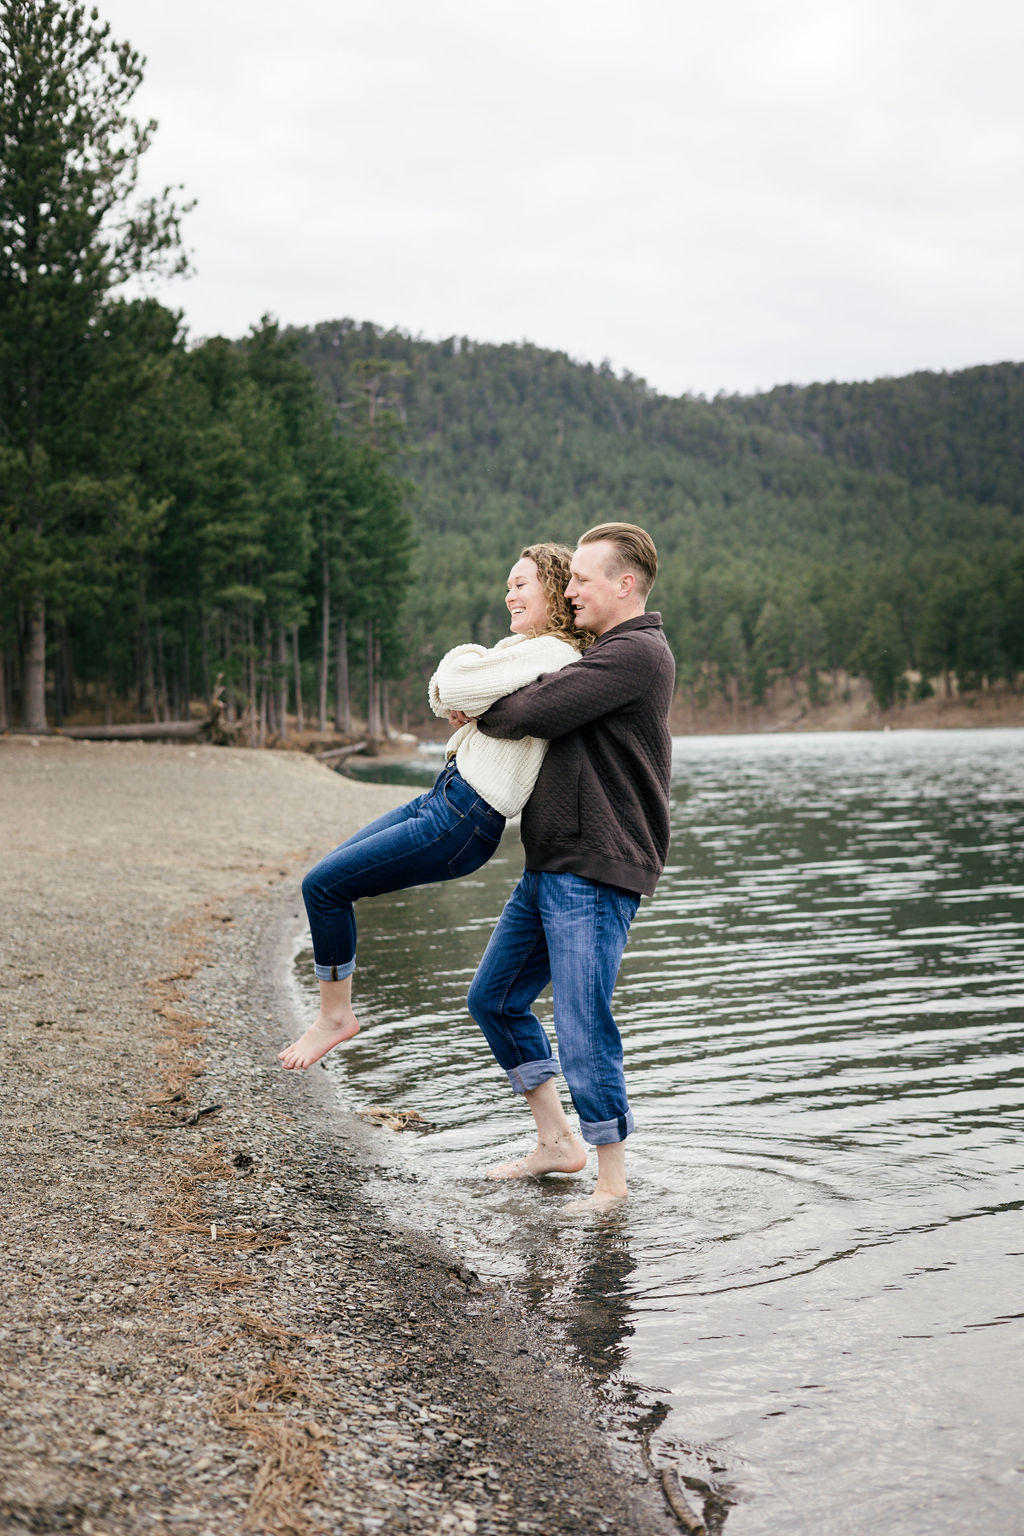 3 Reasons Why You Should Use Your Wedding Photographer For Engagement Photos